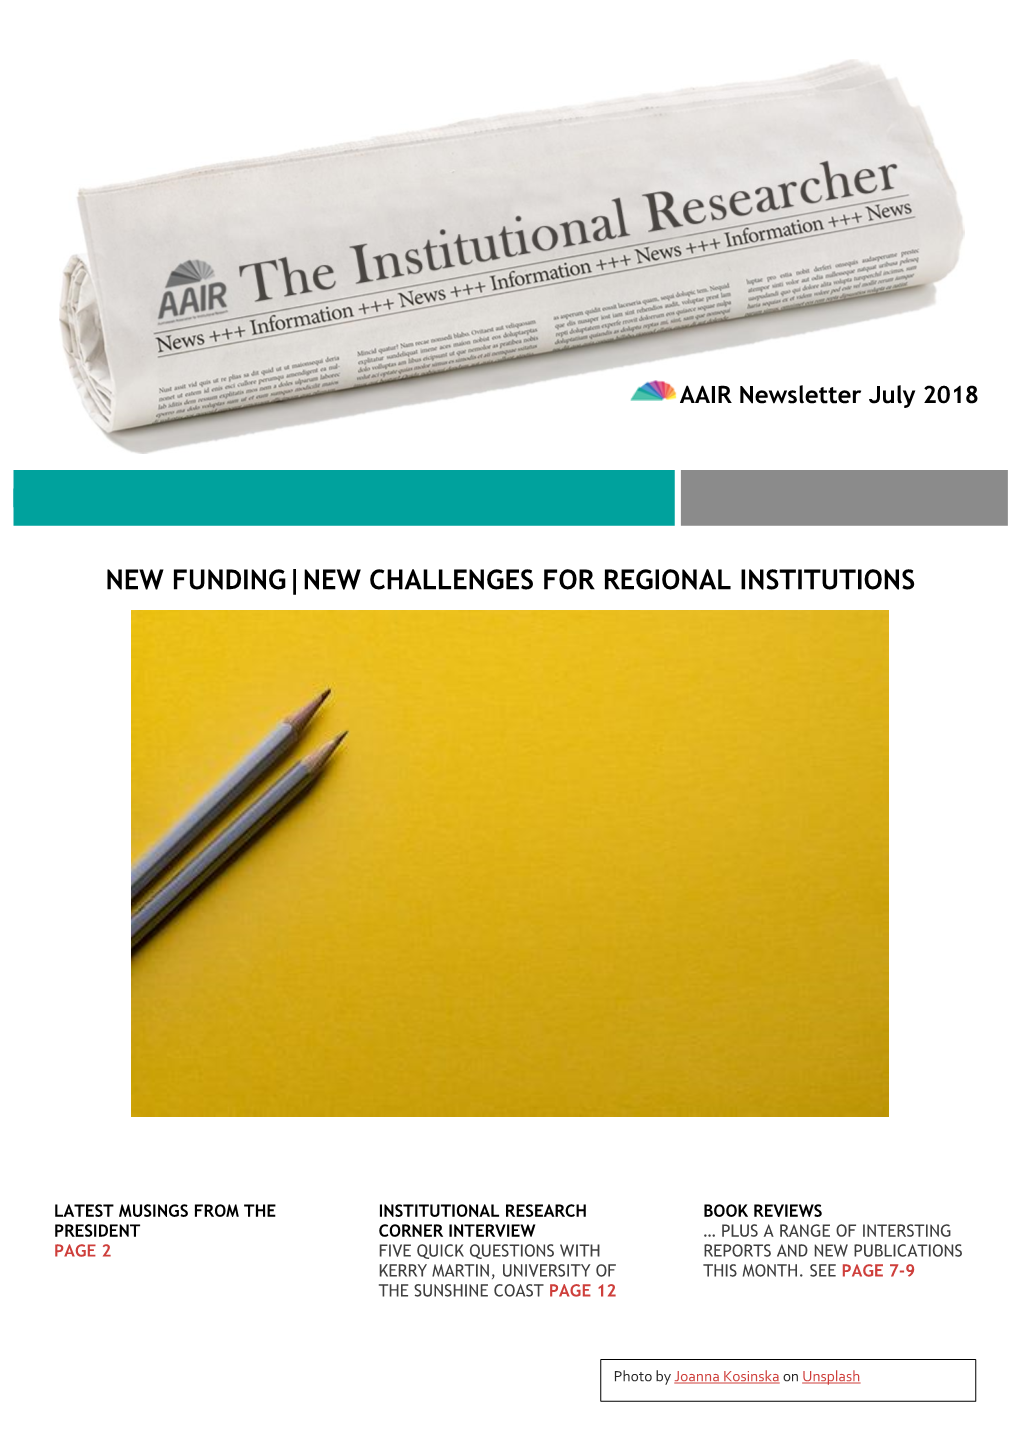 New Funding|New Challenges for Regional Institutions